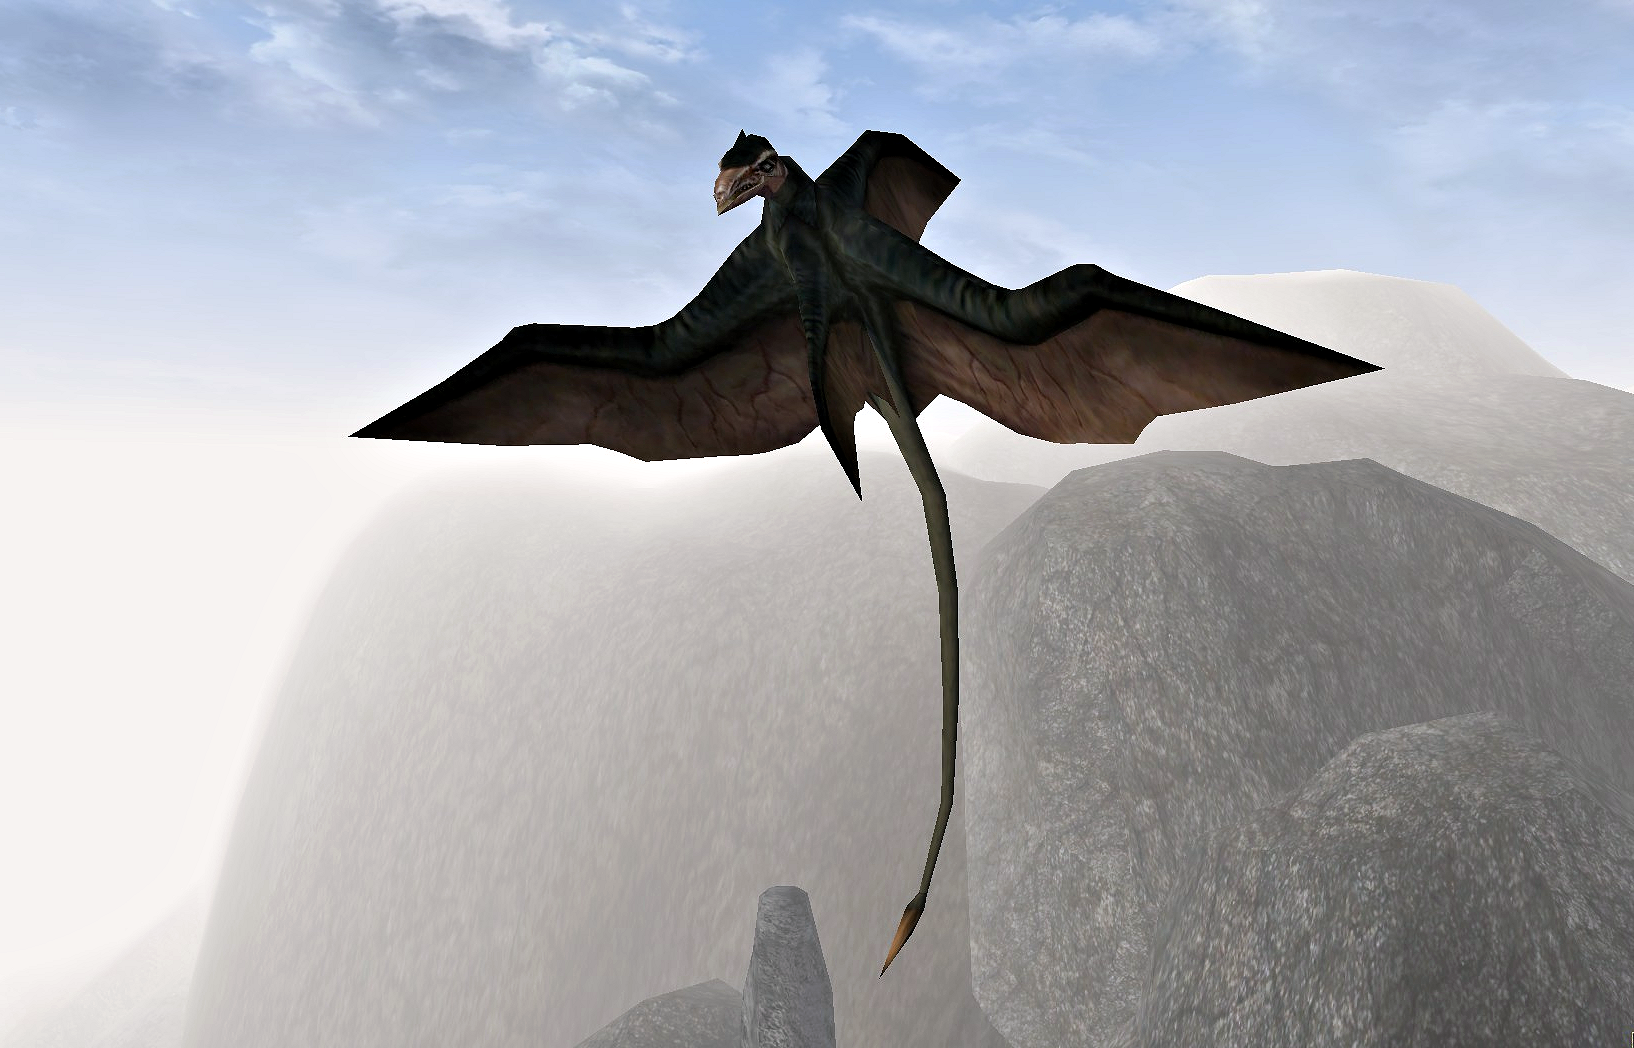 morrowind where are all the birds going